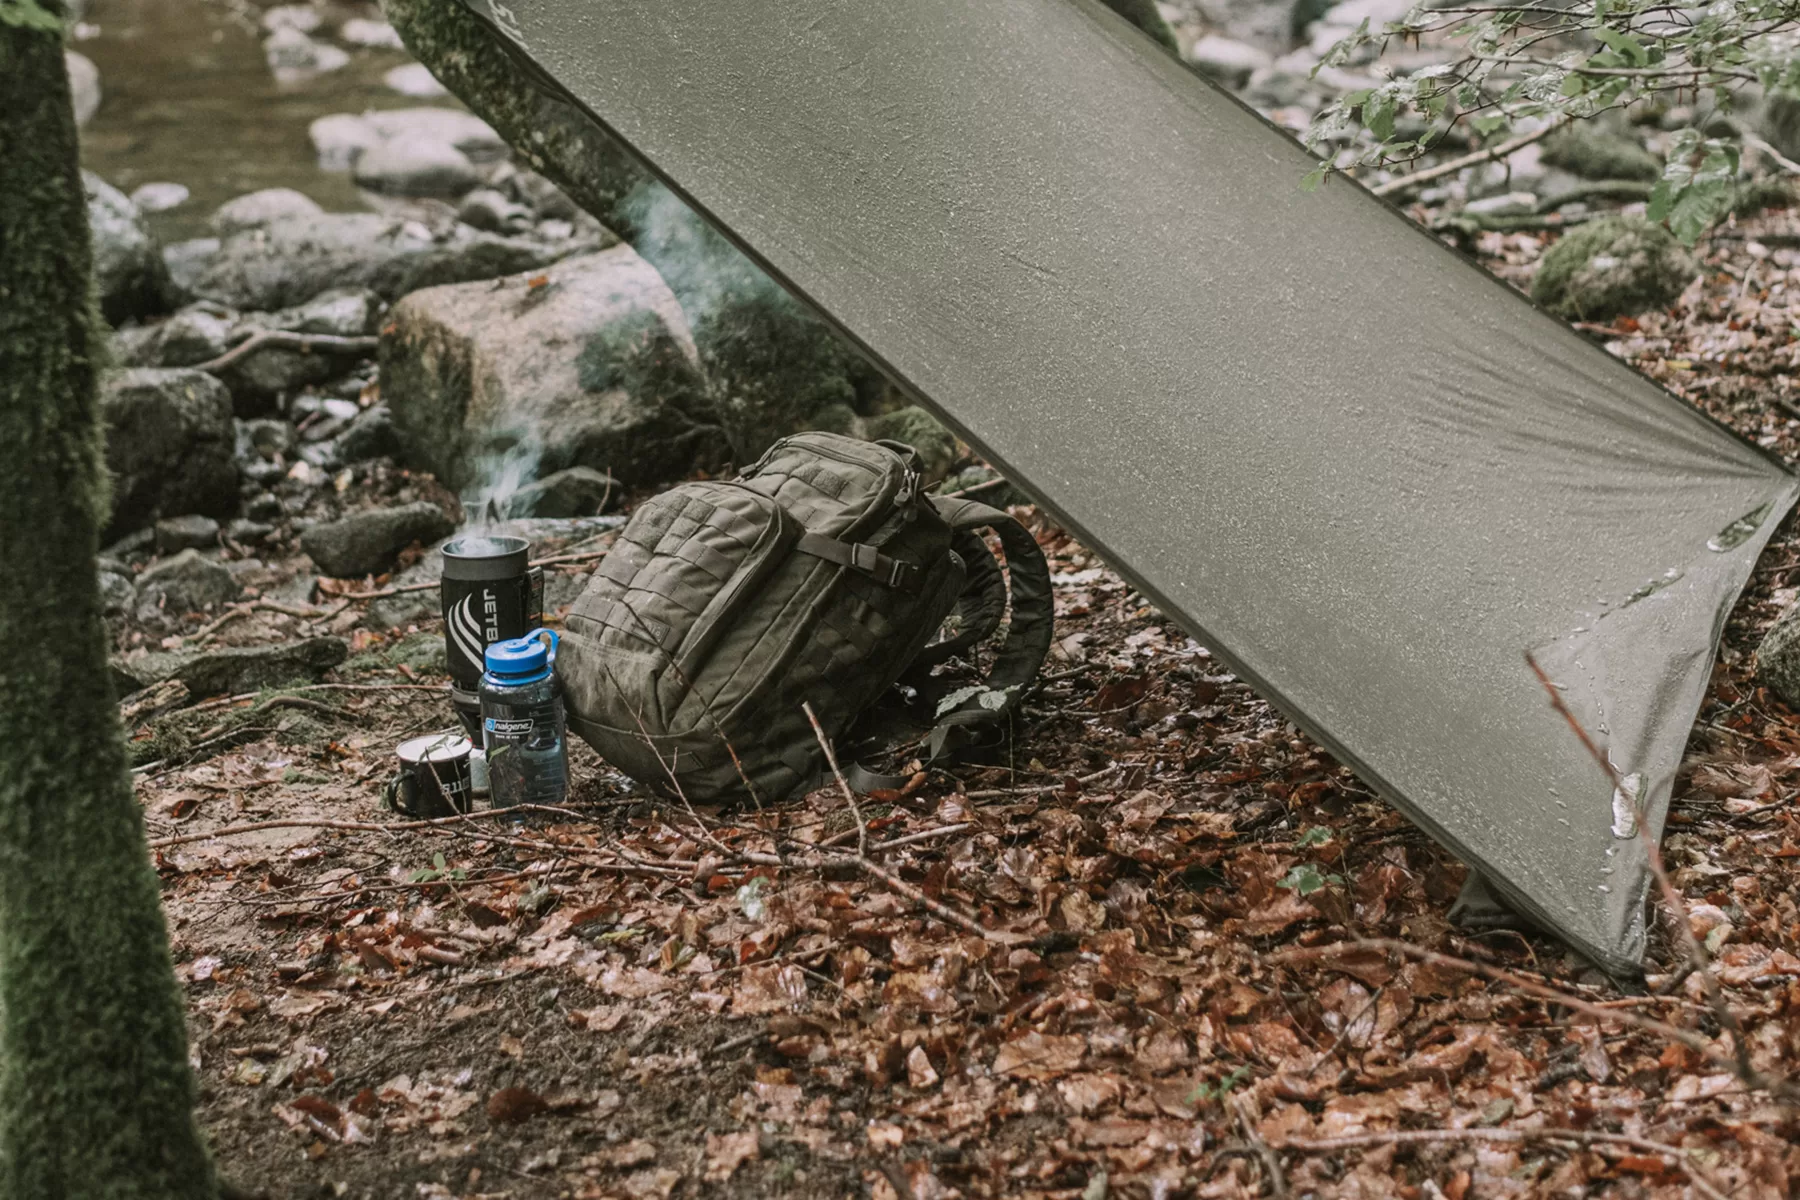 Waterproofing your tactical backpack